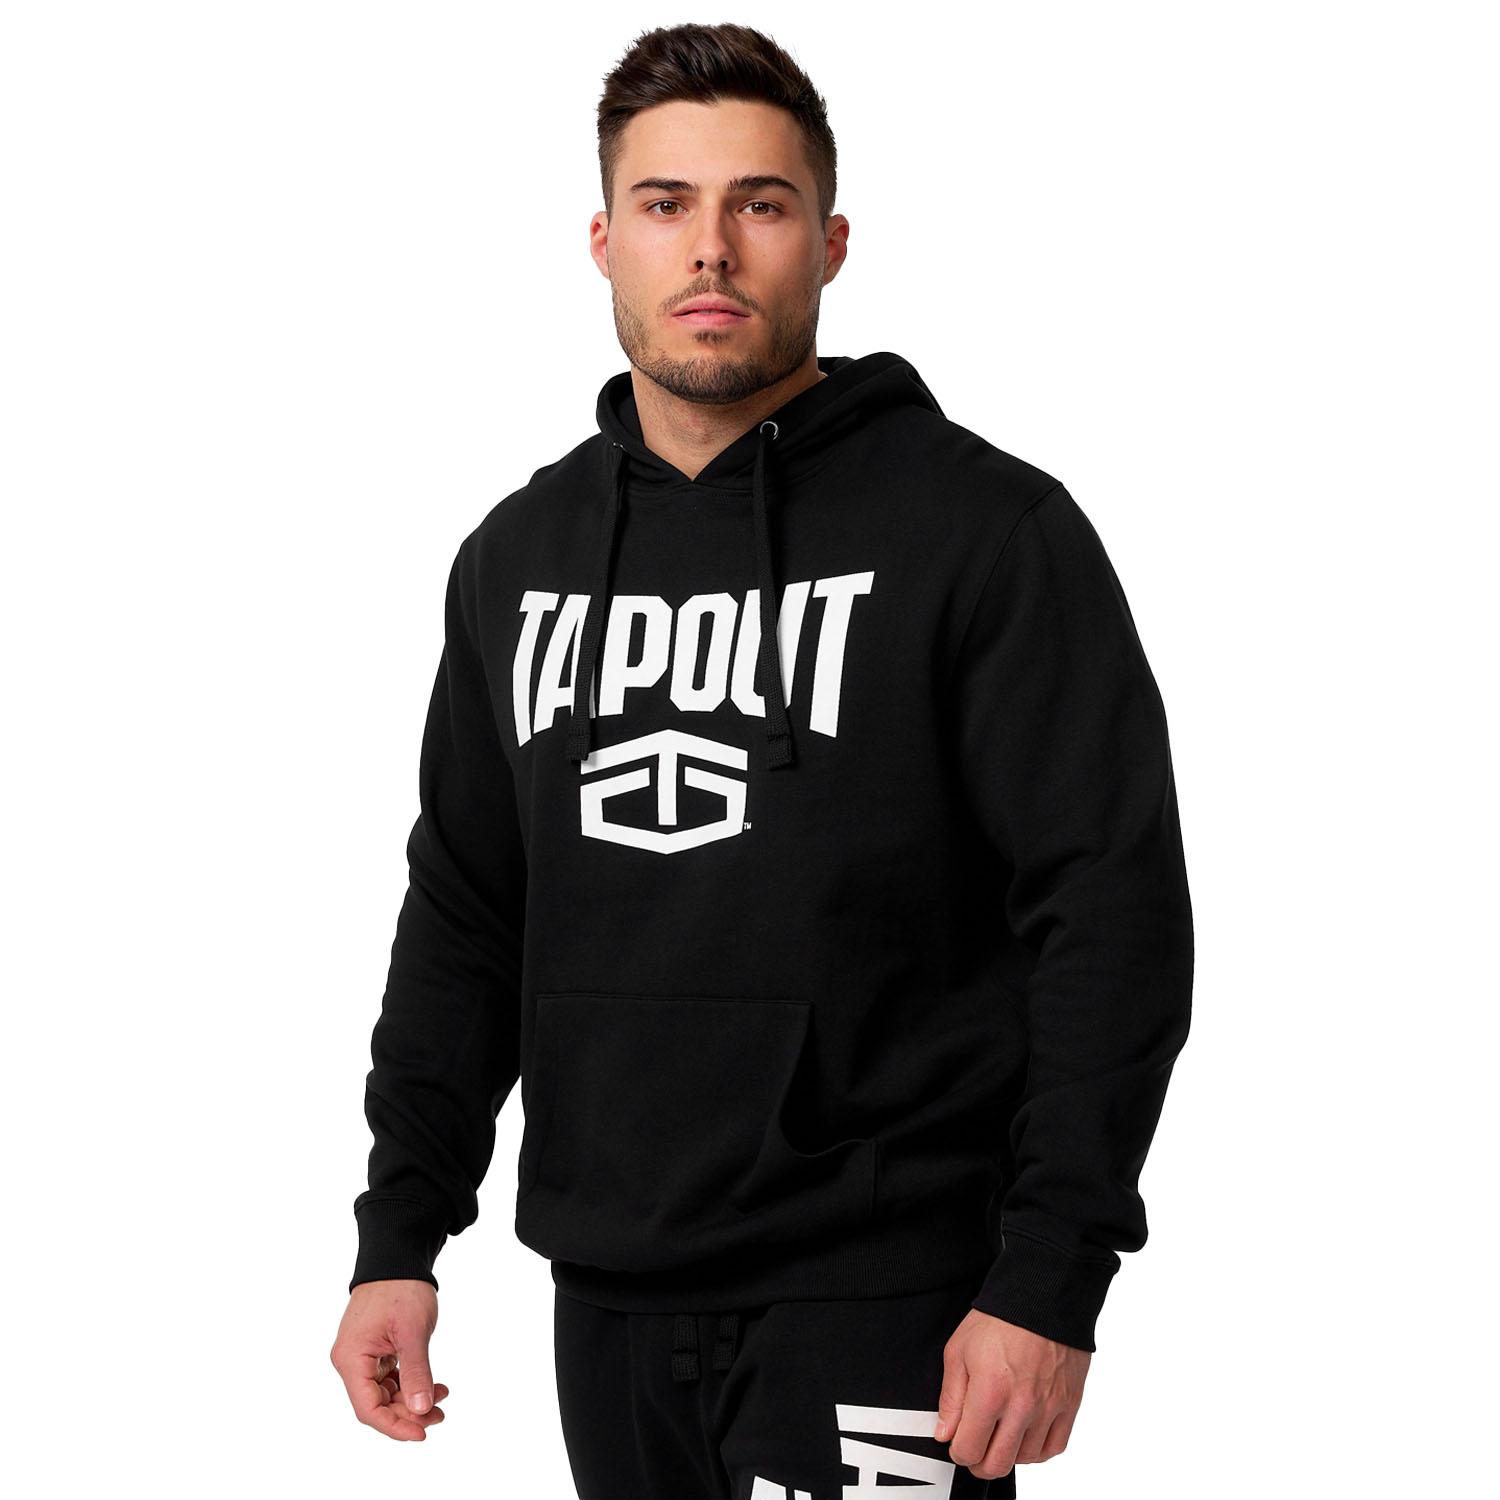 Tapout Hoody, Active Basic, black-white, L